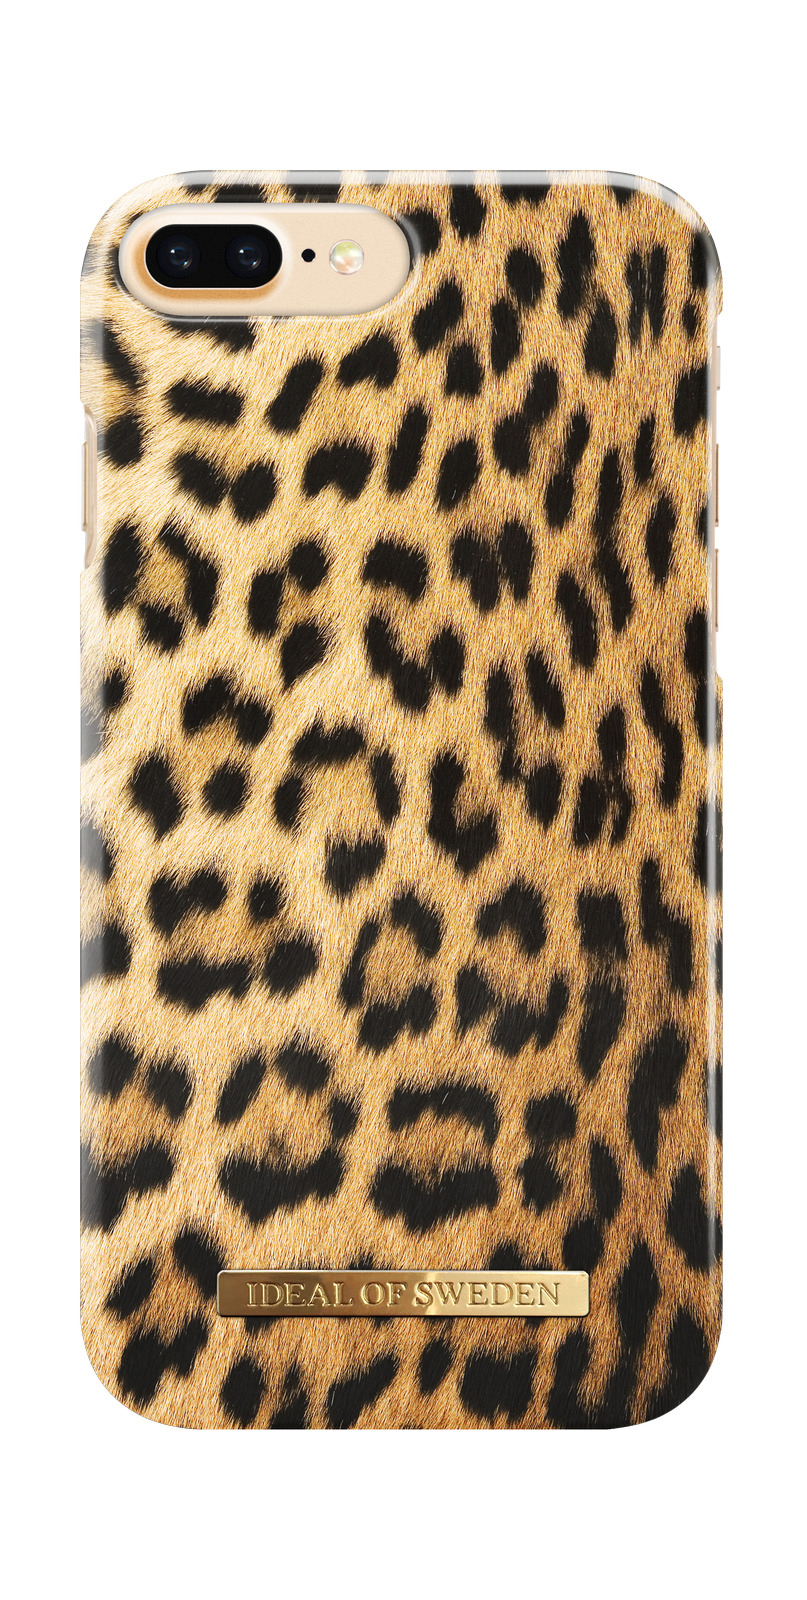 IDEAL Plus, Fashion, 6 8 Plus, Backcover, 7 Leopard Apple, iPhone Wild OF iPhone SWEDEN ,iPhone Plus